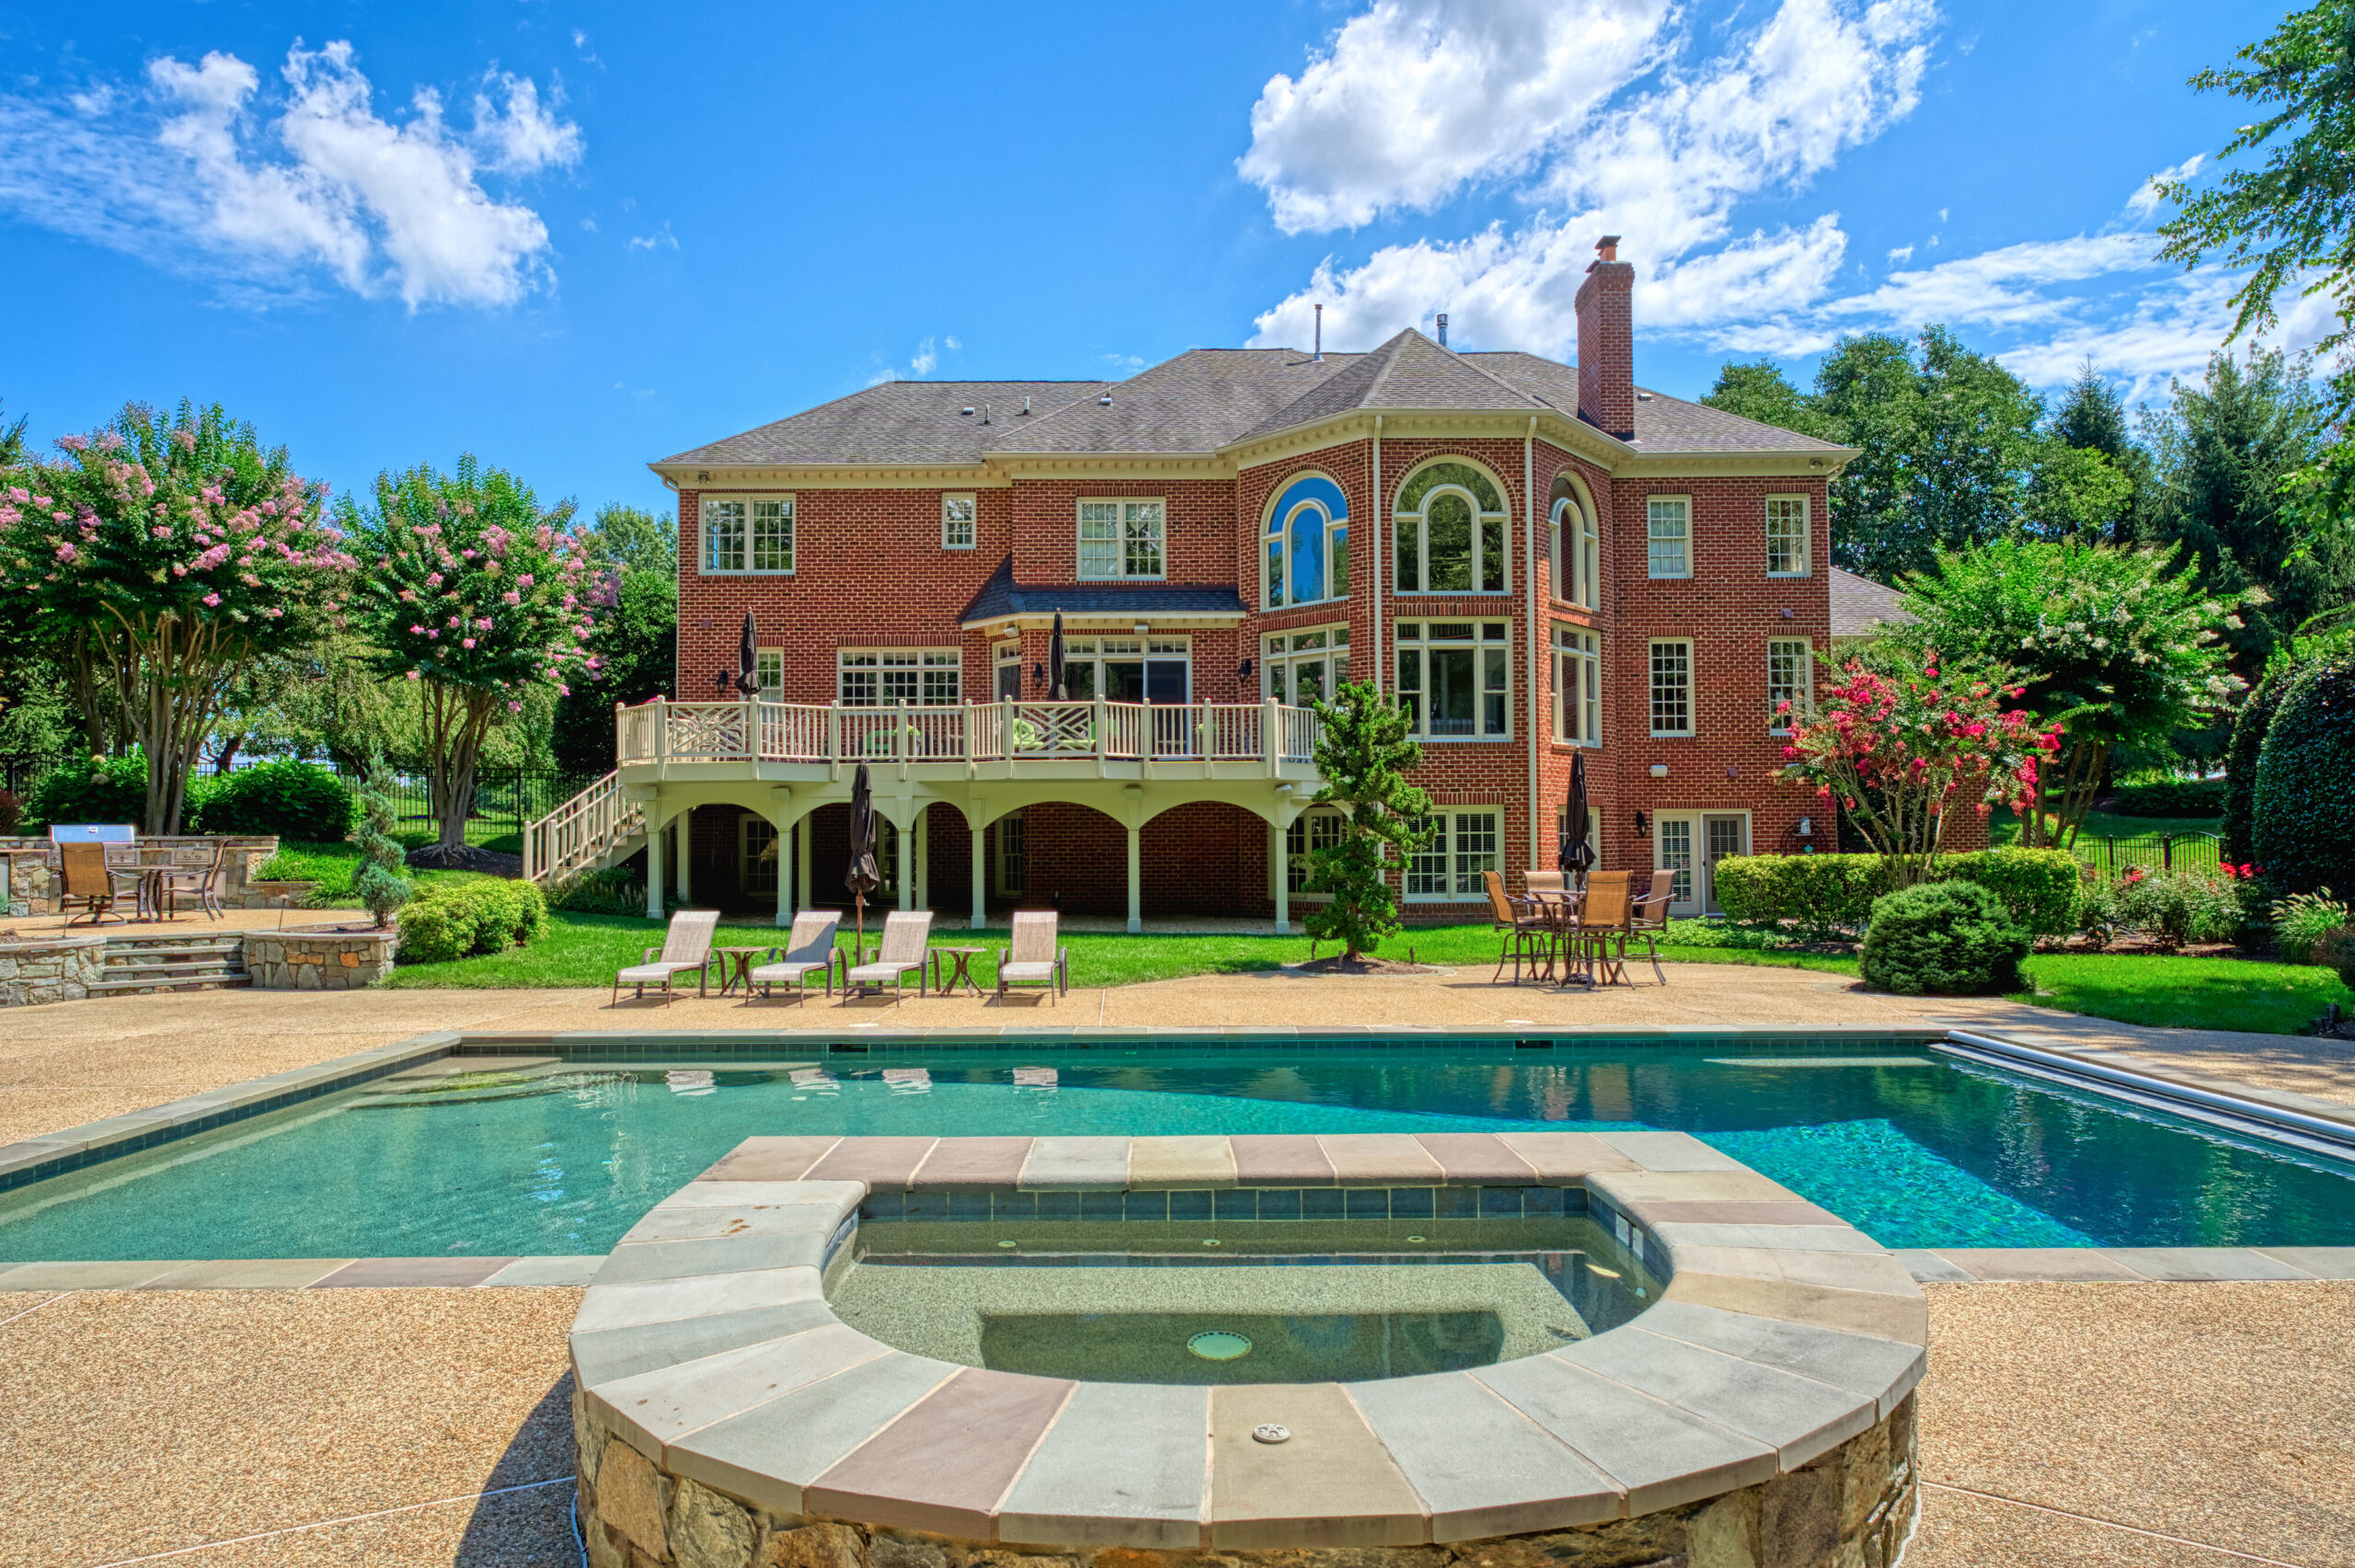 Professional exterior photo of 17087 Bold Venture Drive, Leesburg - showing the rear of the home with large deck, several stone patios and pool and hot tub in the foreground